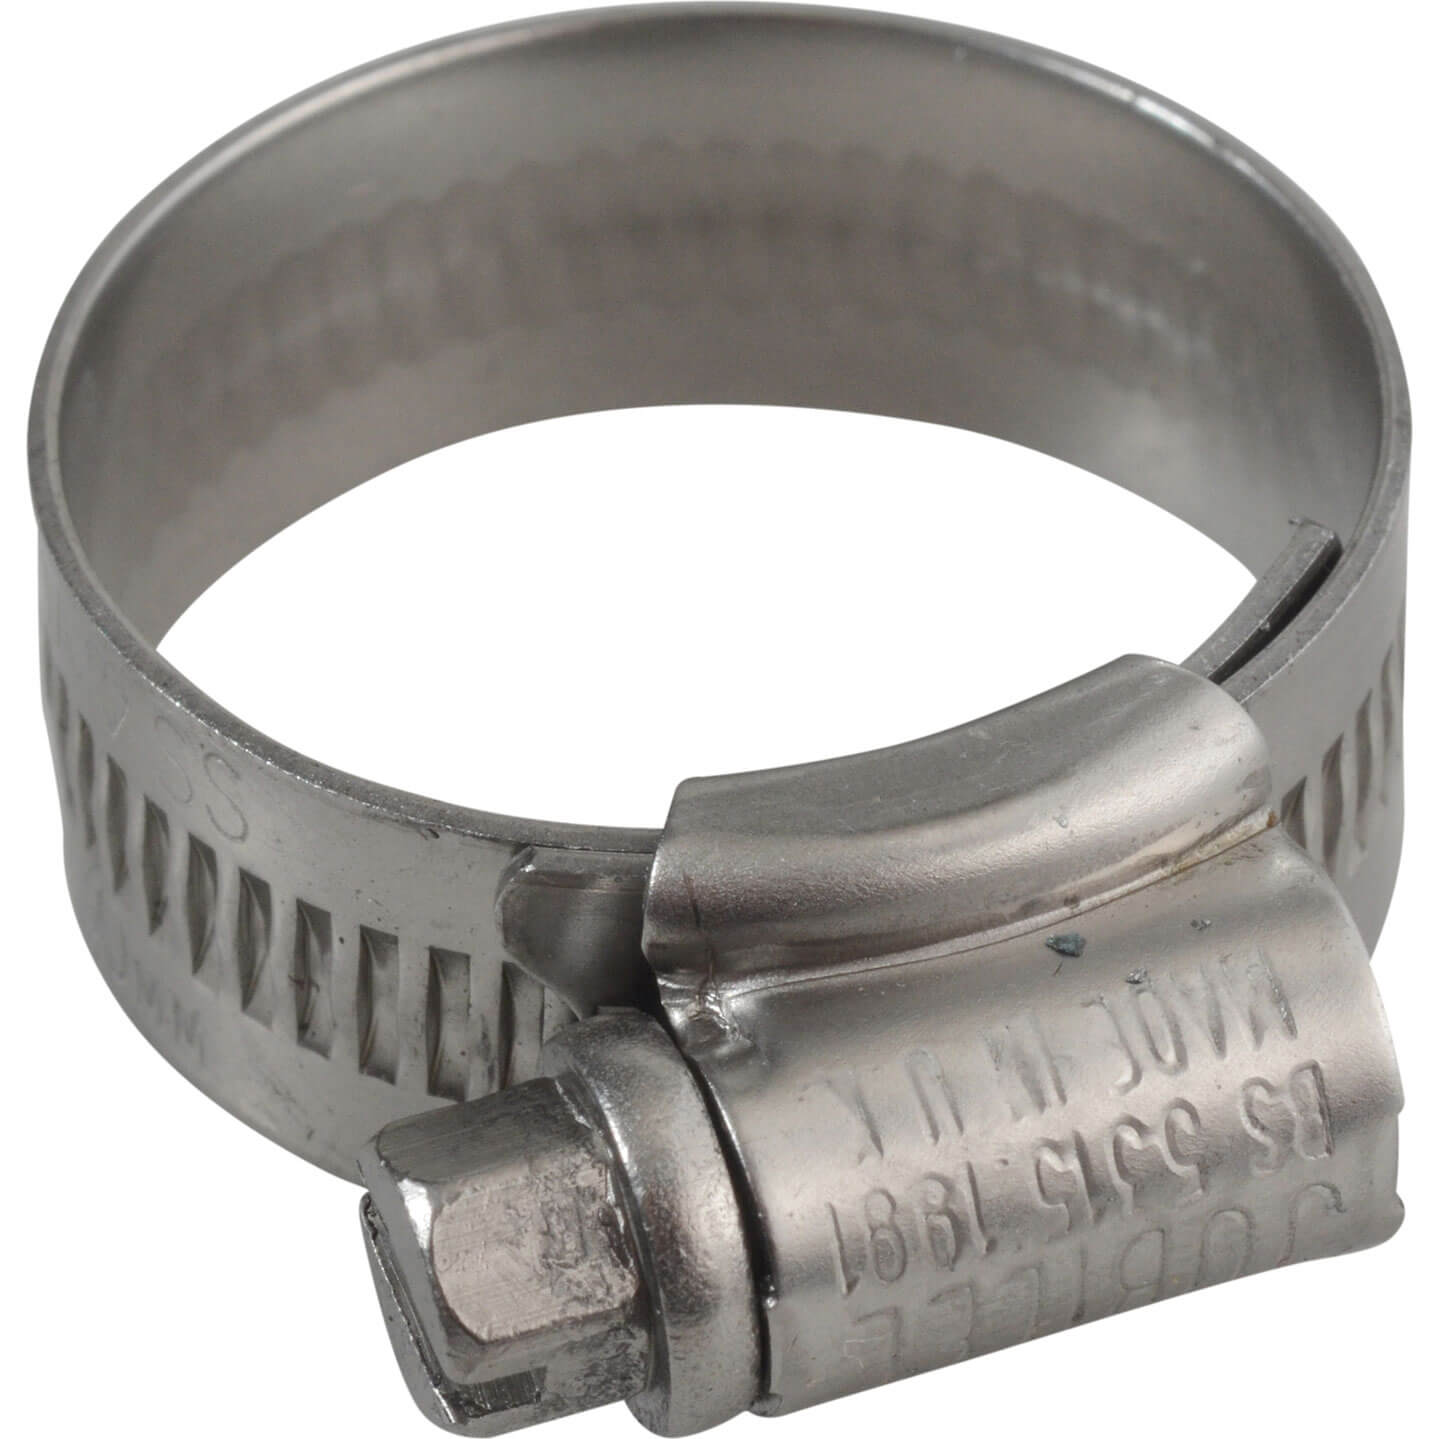 Jubilee 2 Stainless Steel Hose Clip 40 to 55mm (1 5/8 to 2 1/8&quot)